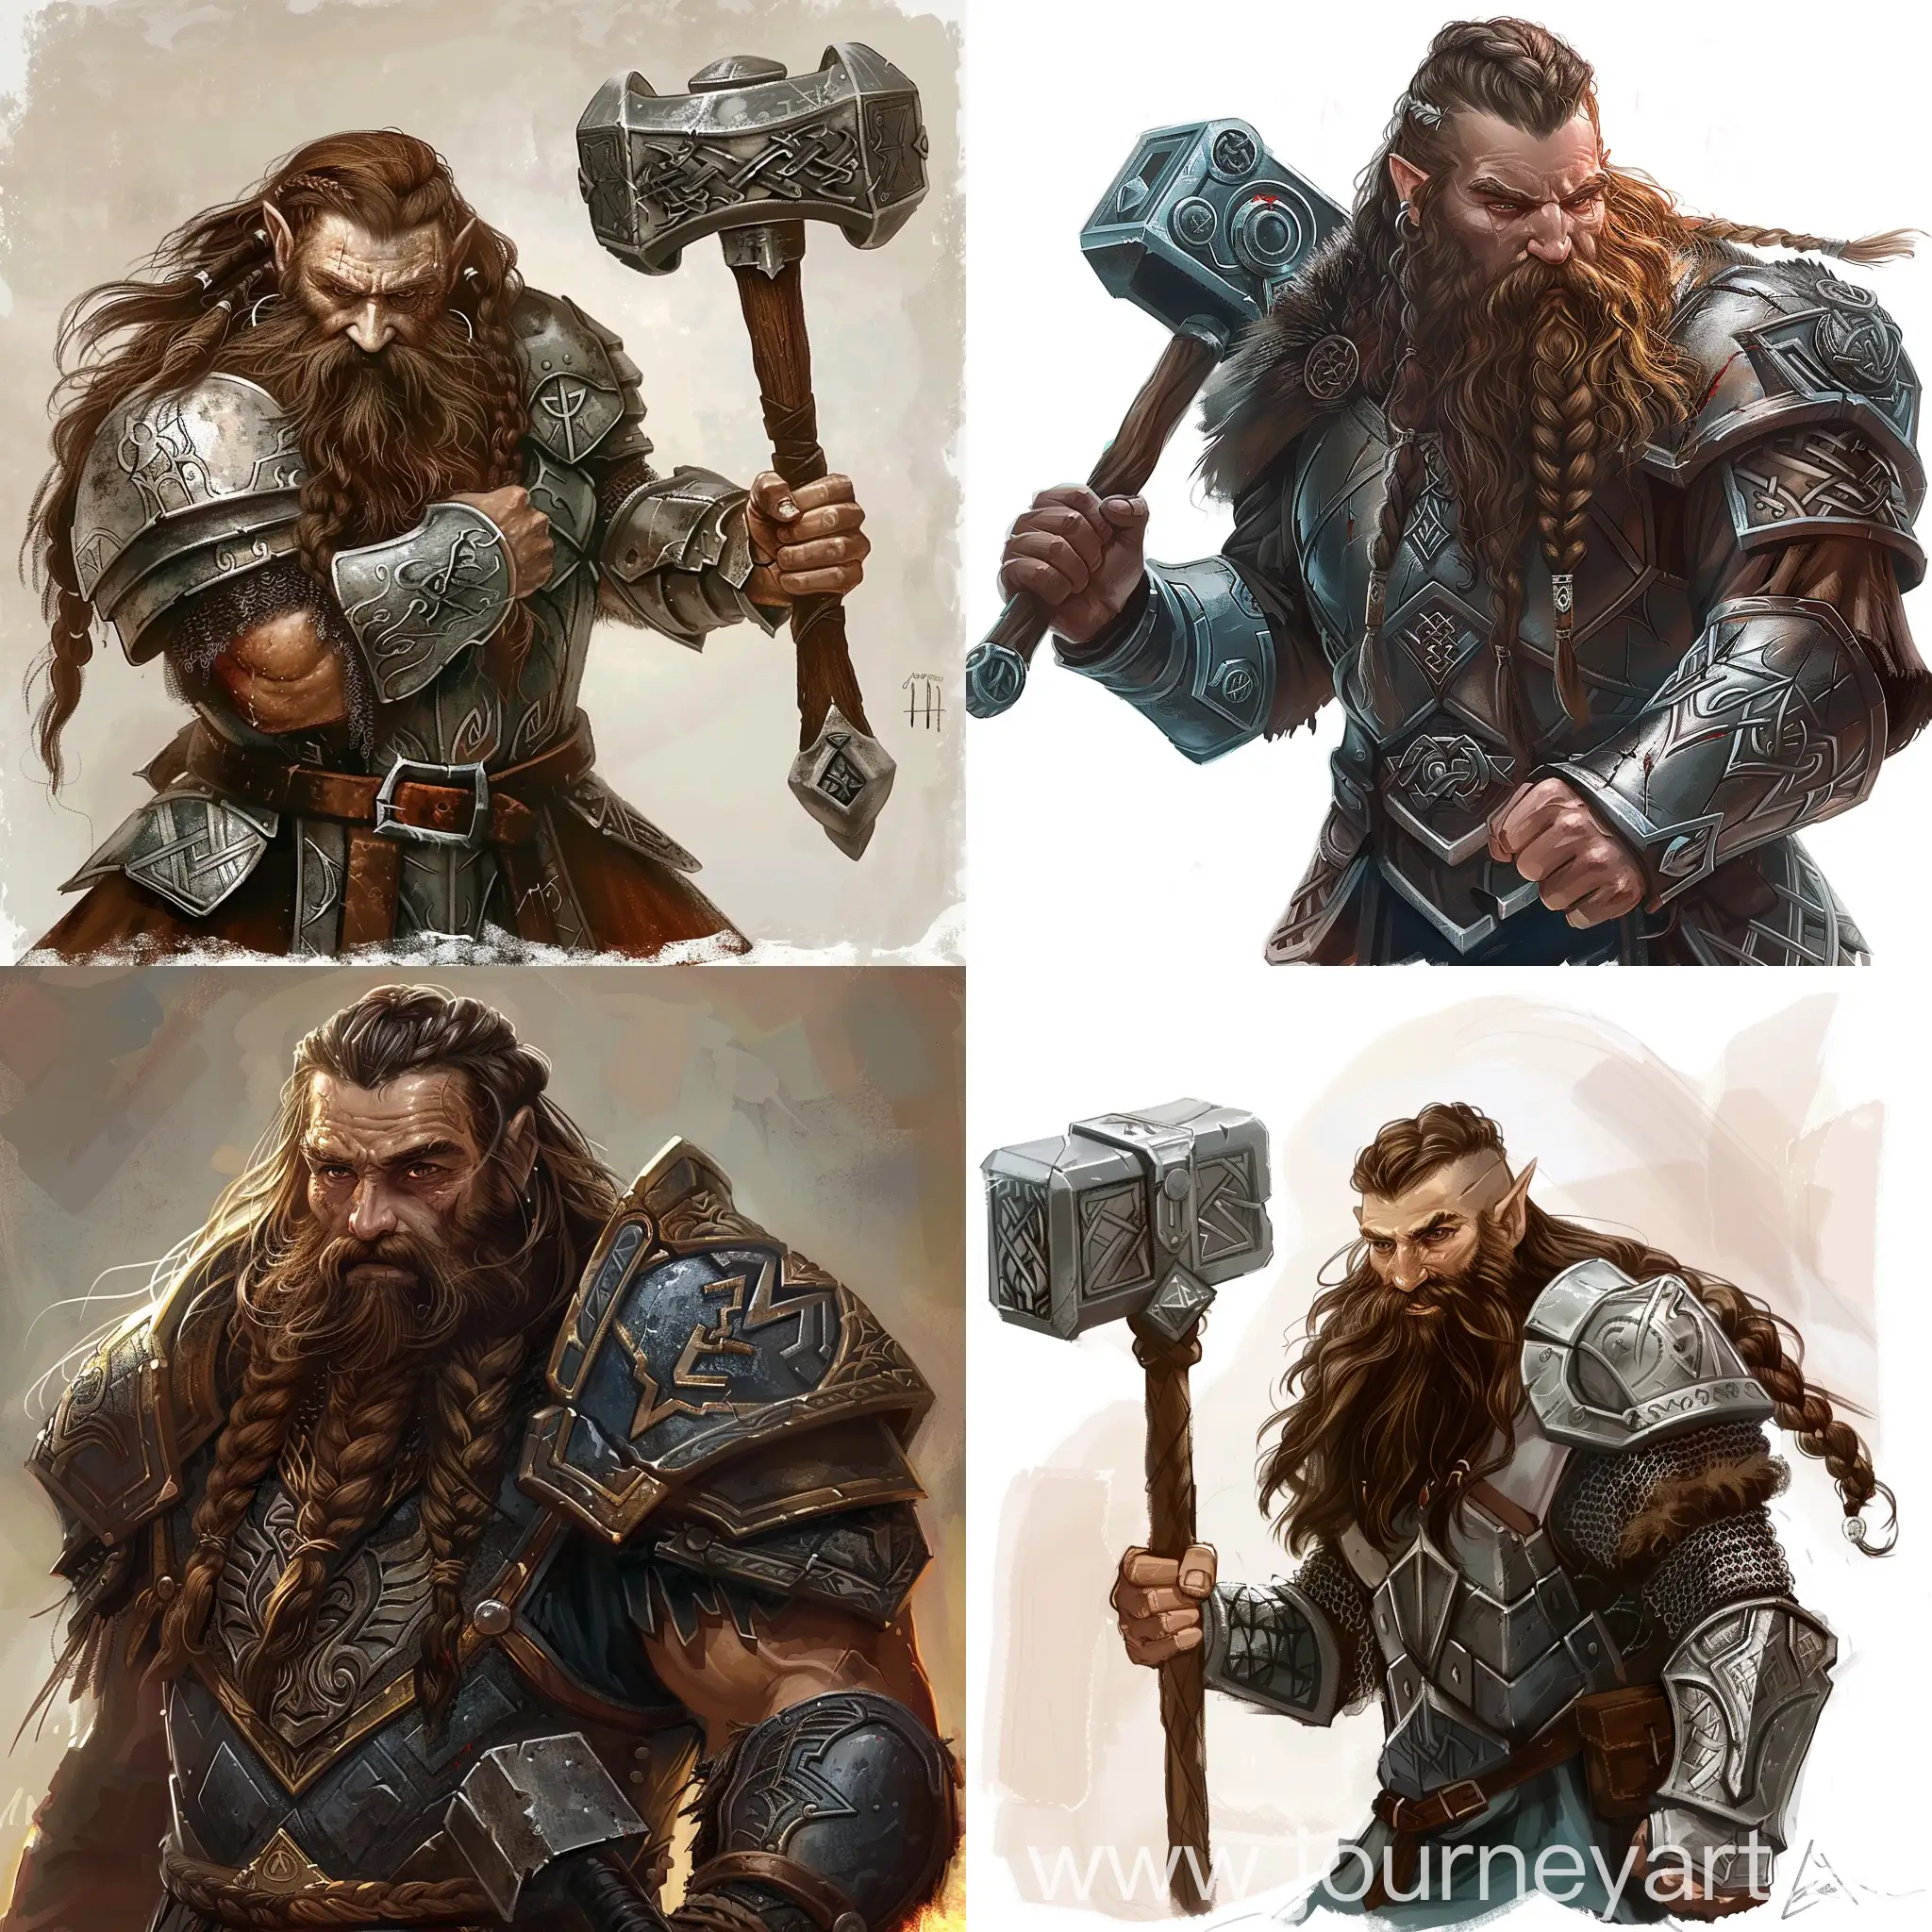 Dwarf. breastplate. The average age. Long brown hair. with a braided brown beard. With a two-handed iron hammer. in the art style of the Lord of the Rings